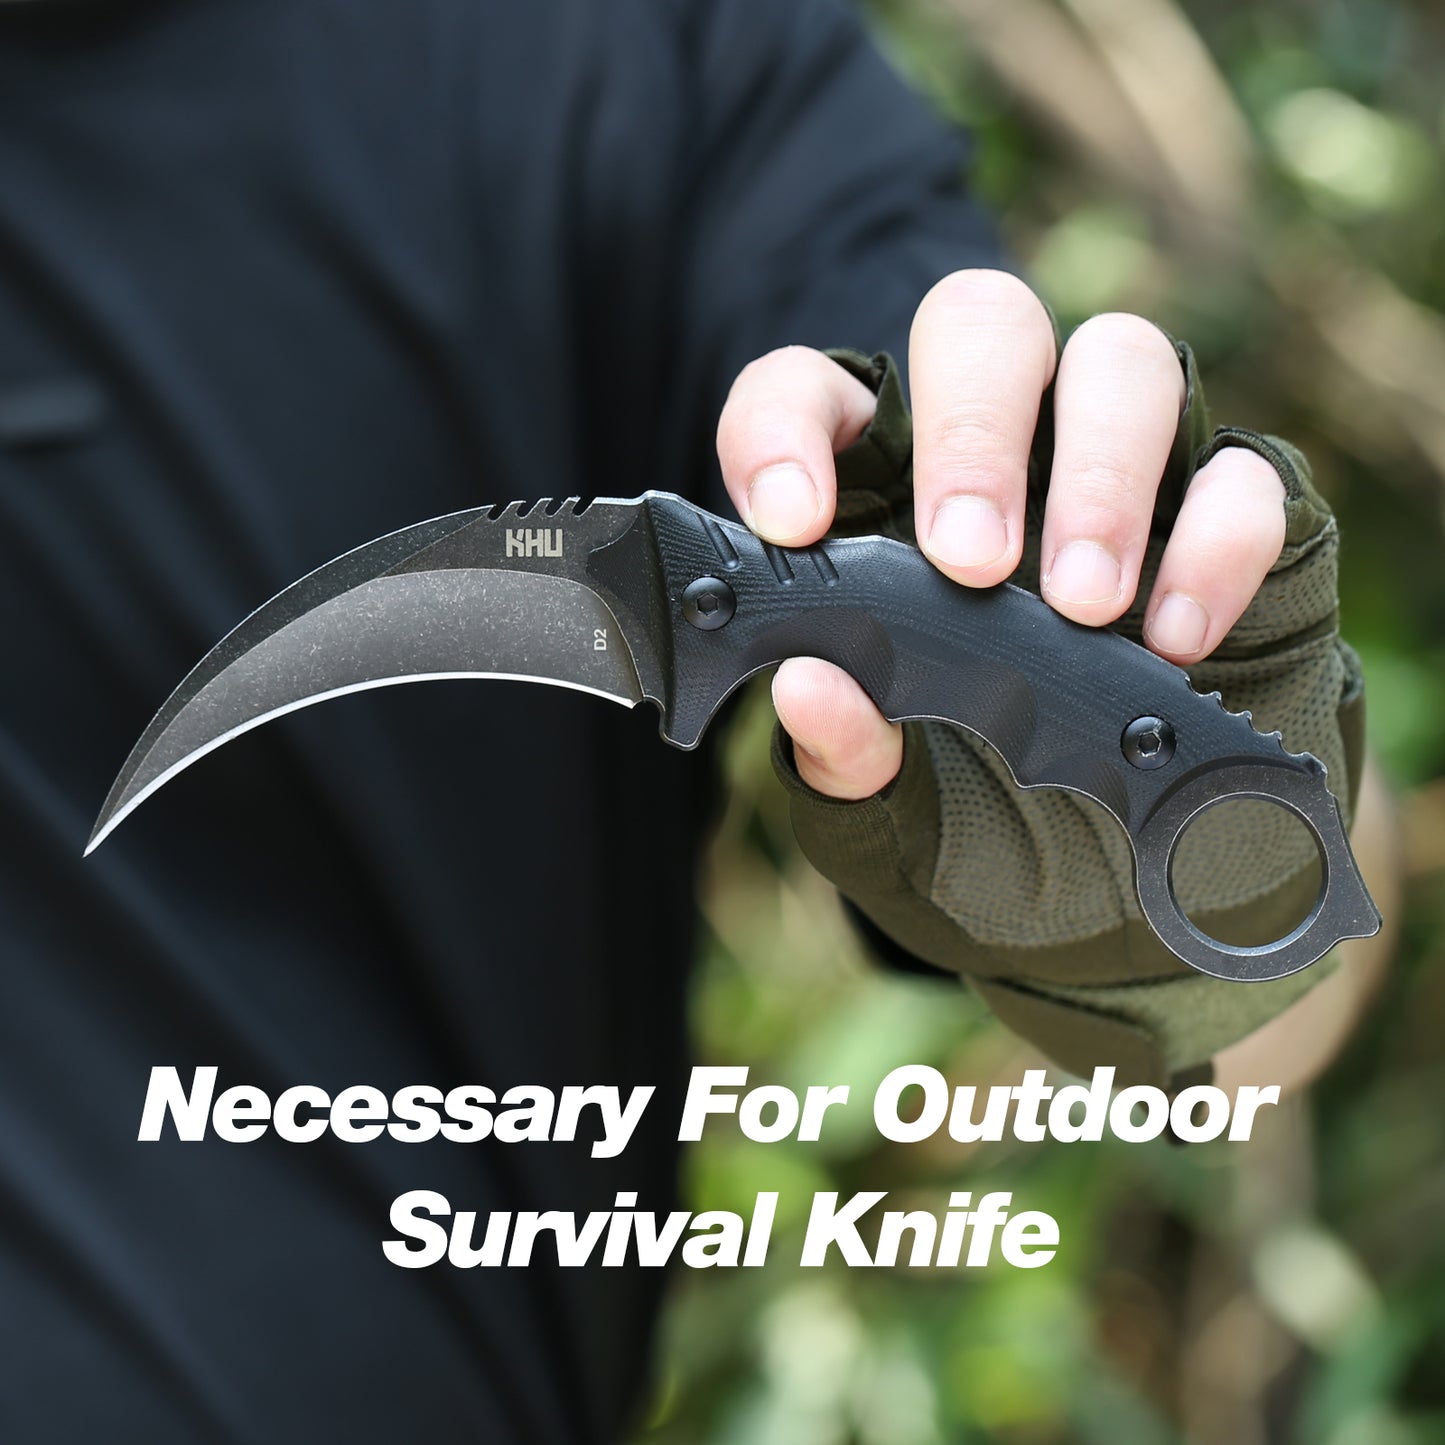 KHU Fixed Blade Knife Tactical, karambit Knife Hunting Knife Claw Knife Survival Knife D2 Steel G10 Handle, Outdoor Hunting Camping Accessories Camping Gear with Kydex Sheath